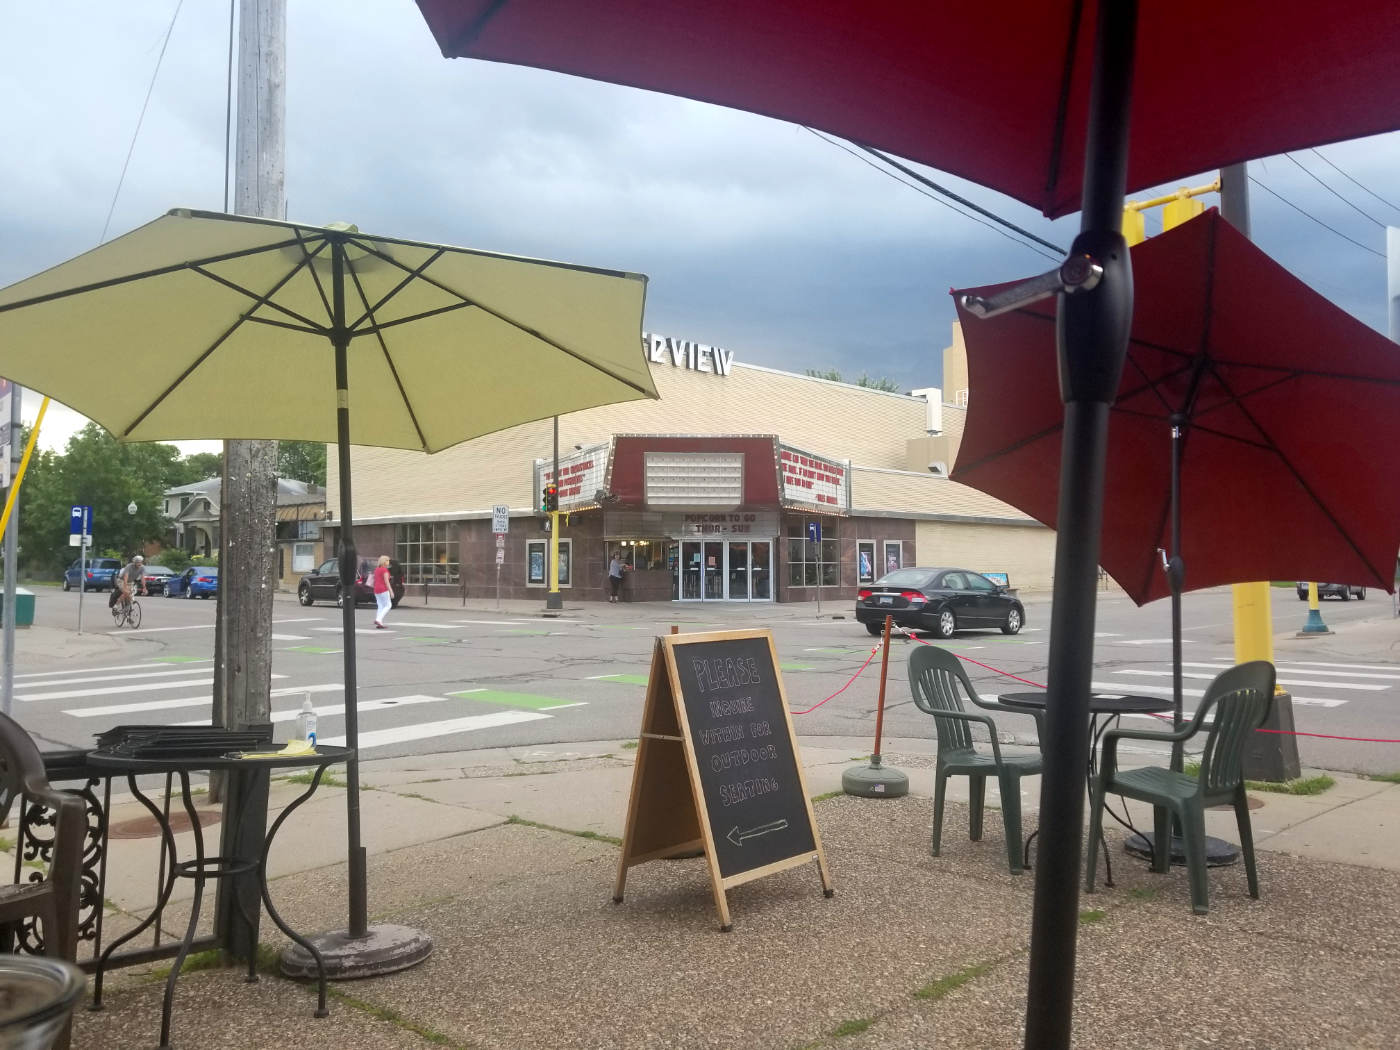 sidewalk patio scene with tables, umbrellas, and blackboard sandwich sign, with theater marquee in background across an intersection with a car and a few pedestrians